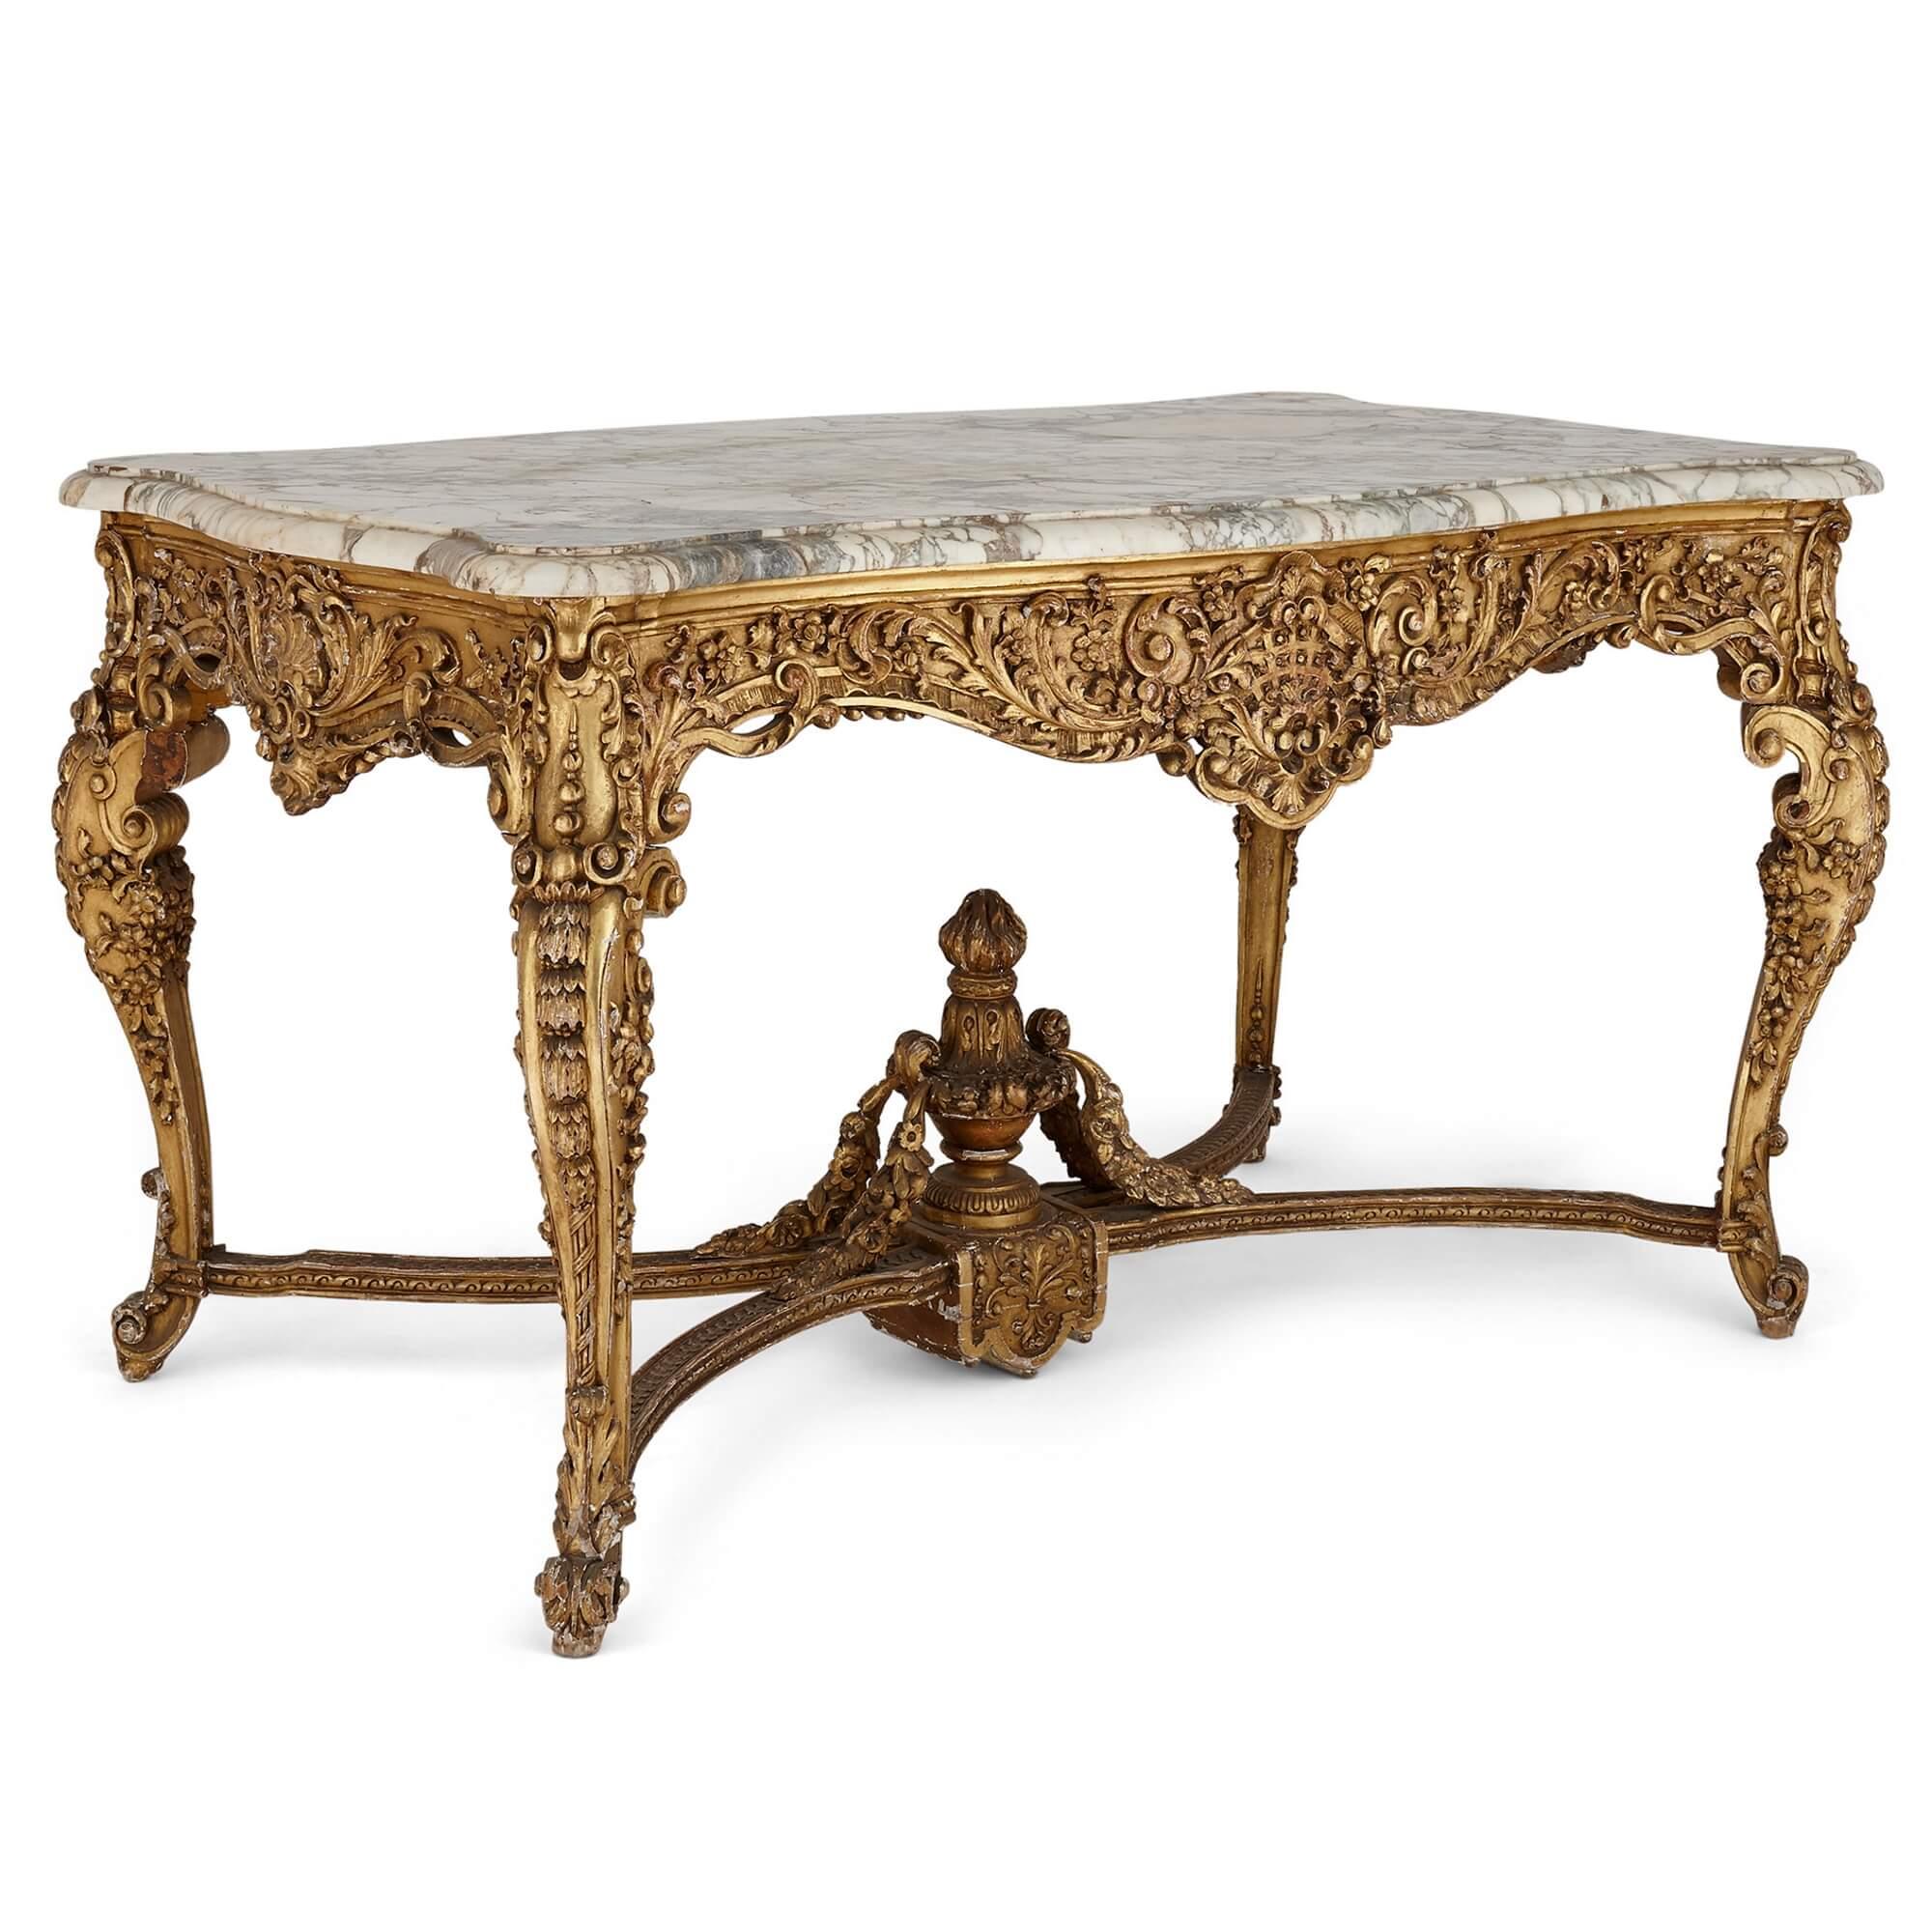 Antique marble topped Régence style giltwood centre table
French, 19th century
Height 77.5cm, width 133.5cm, depth 81.5cm

This splendid centre table showcases everything beautiful about the opulent Regence style of furniture making: its intricate